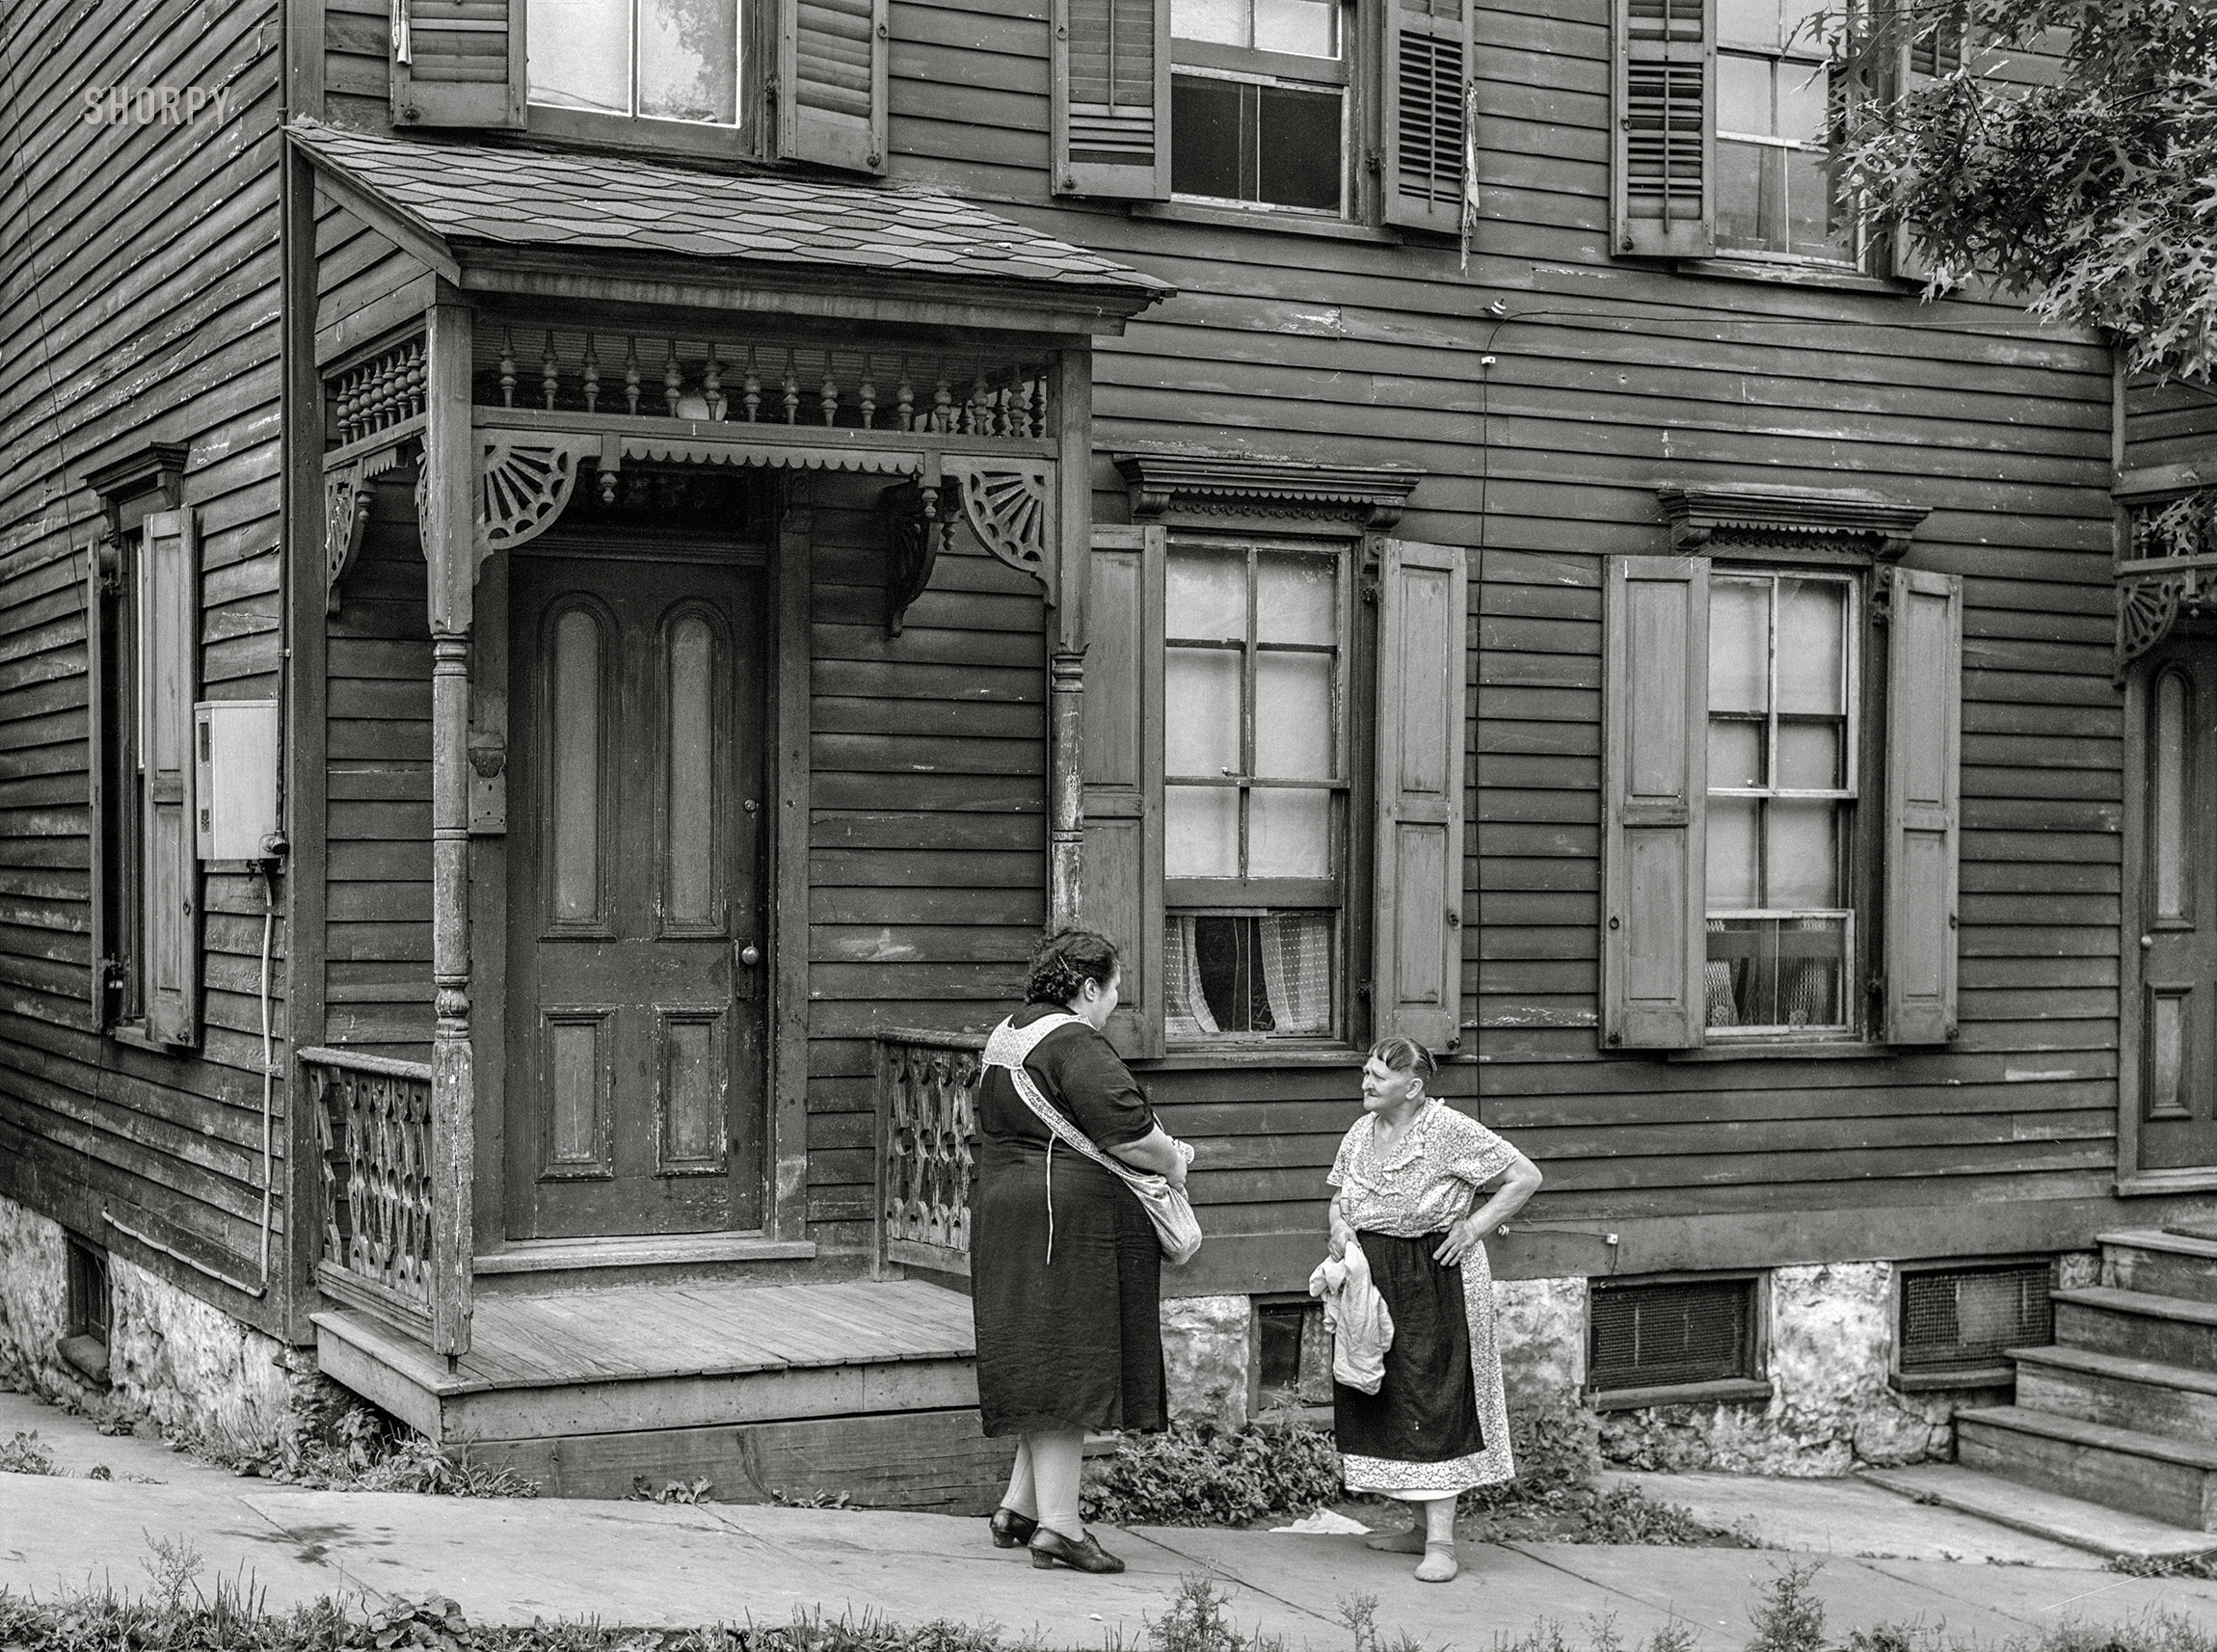 August 1940. "Two women living on the main street of Upper Mauch Chunk, Pennsylvania." Acetate negative by Jack Delano for the Farm Security Administration. View full size.